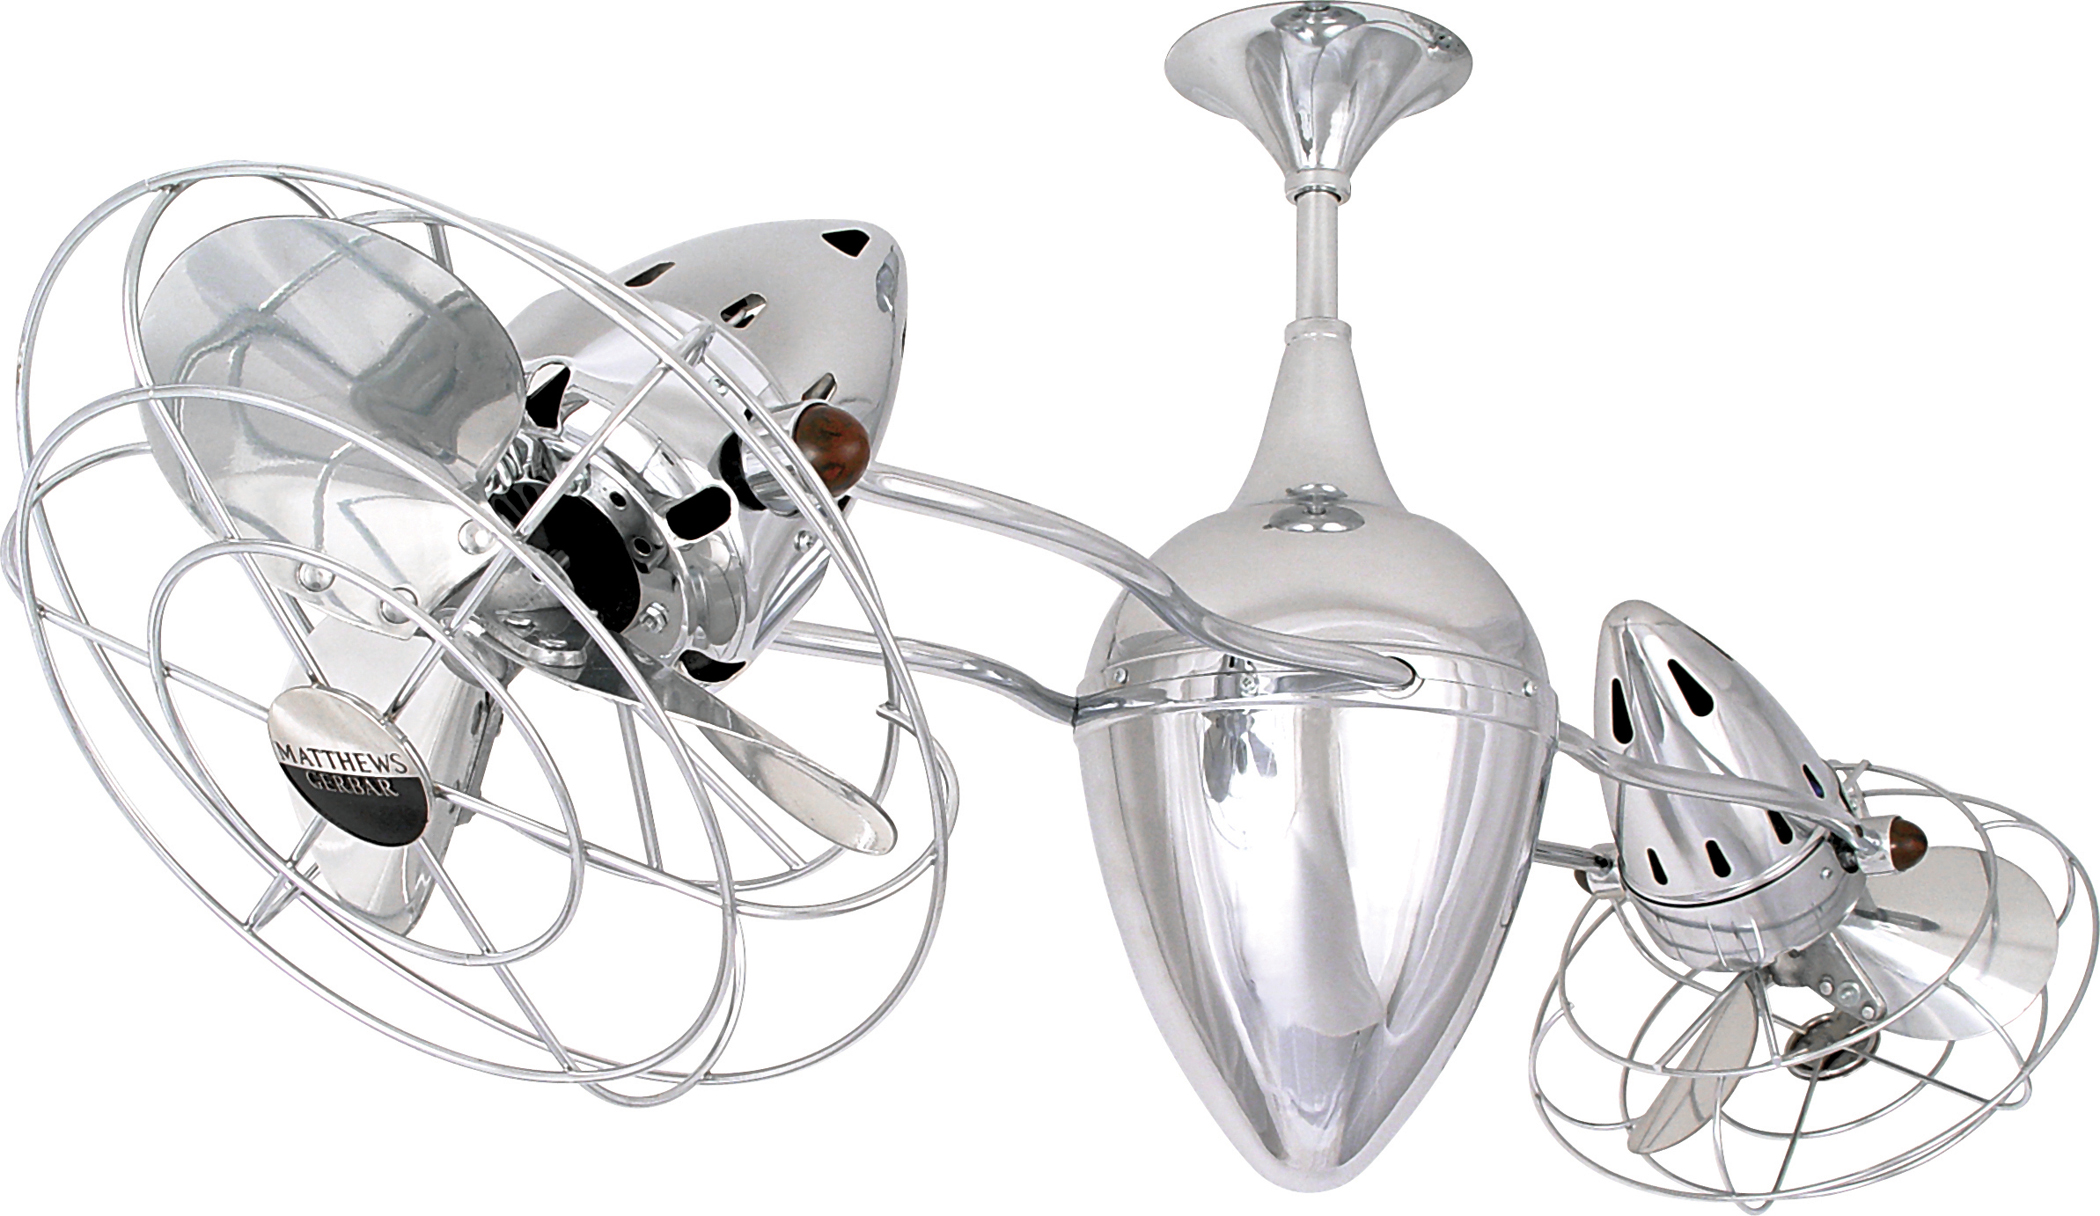 Ar Ruthiane Dual Headed Rotational Ceiling Fan in Polished Chrome with Metal Blades